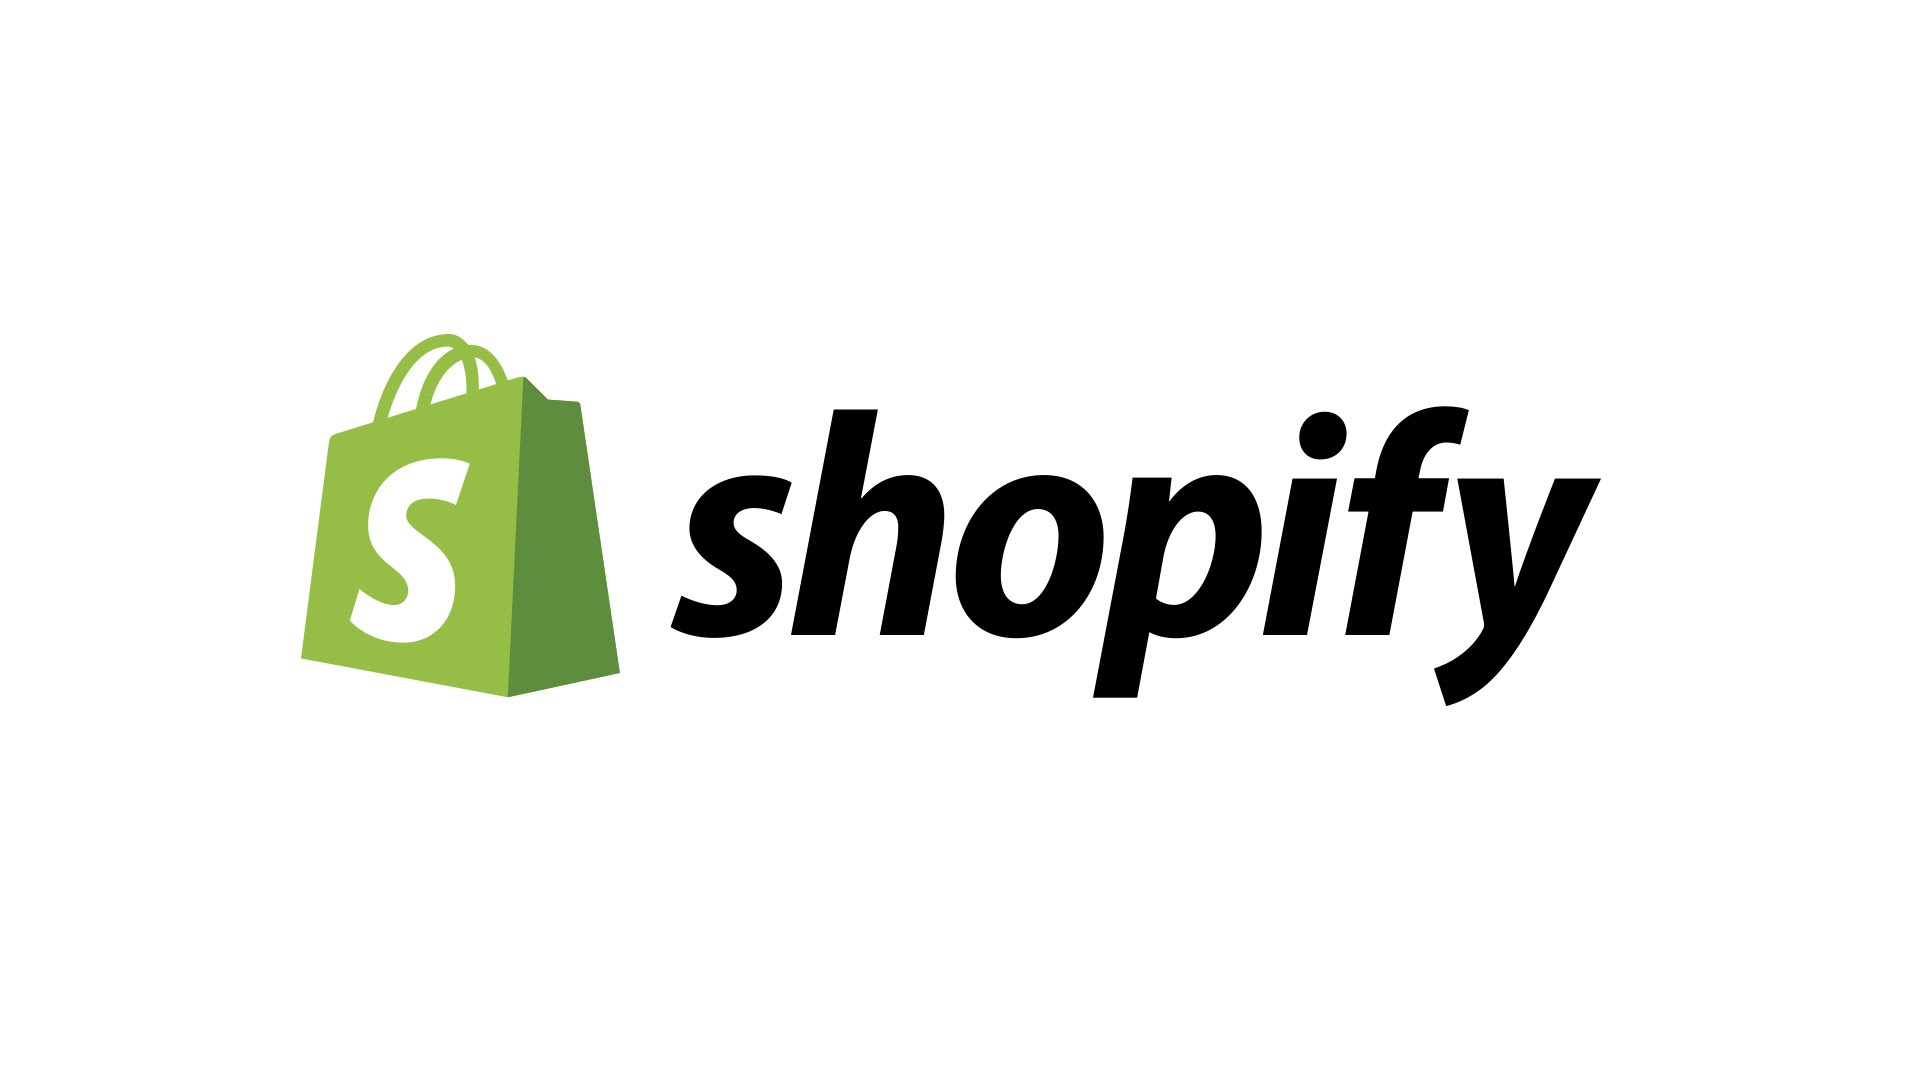 shopify_software integration_Busyness 2 business consulting